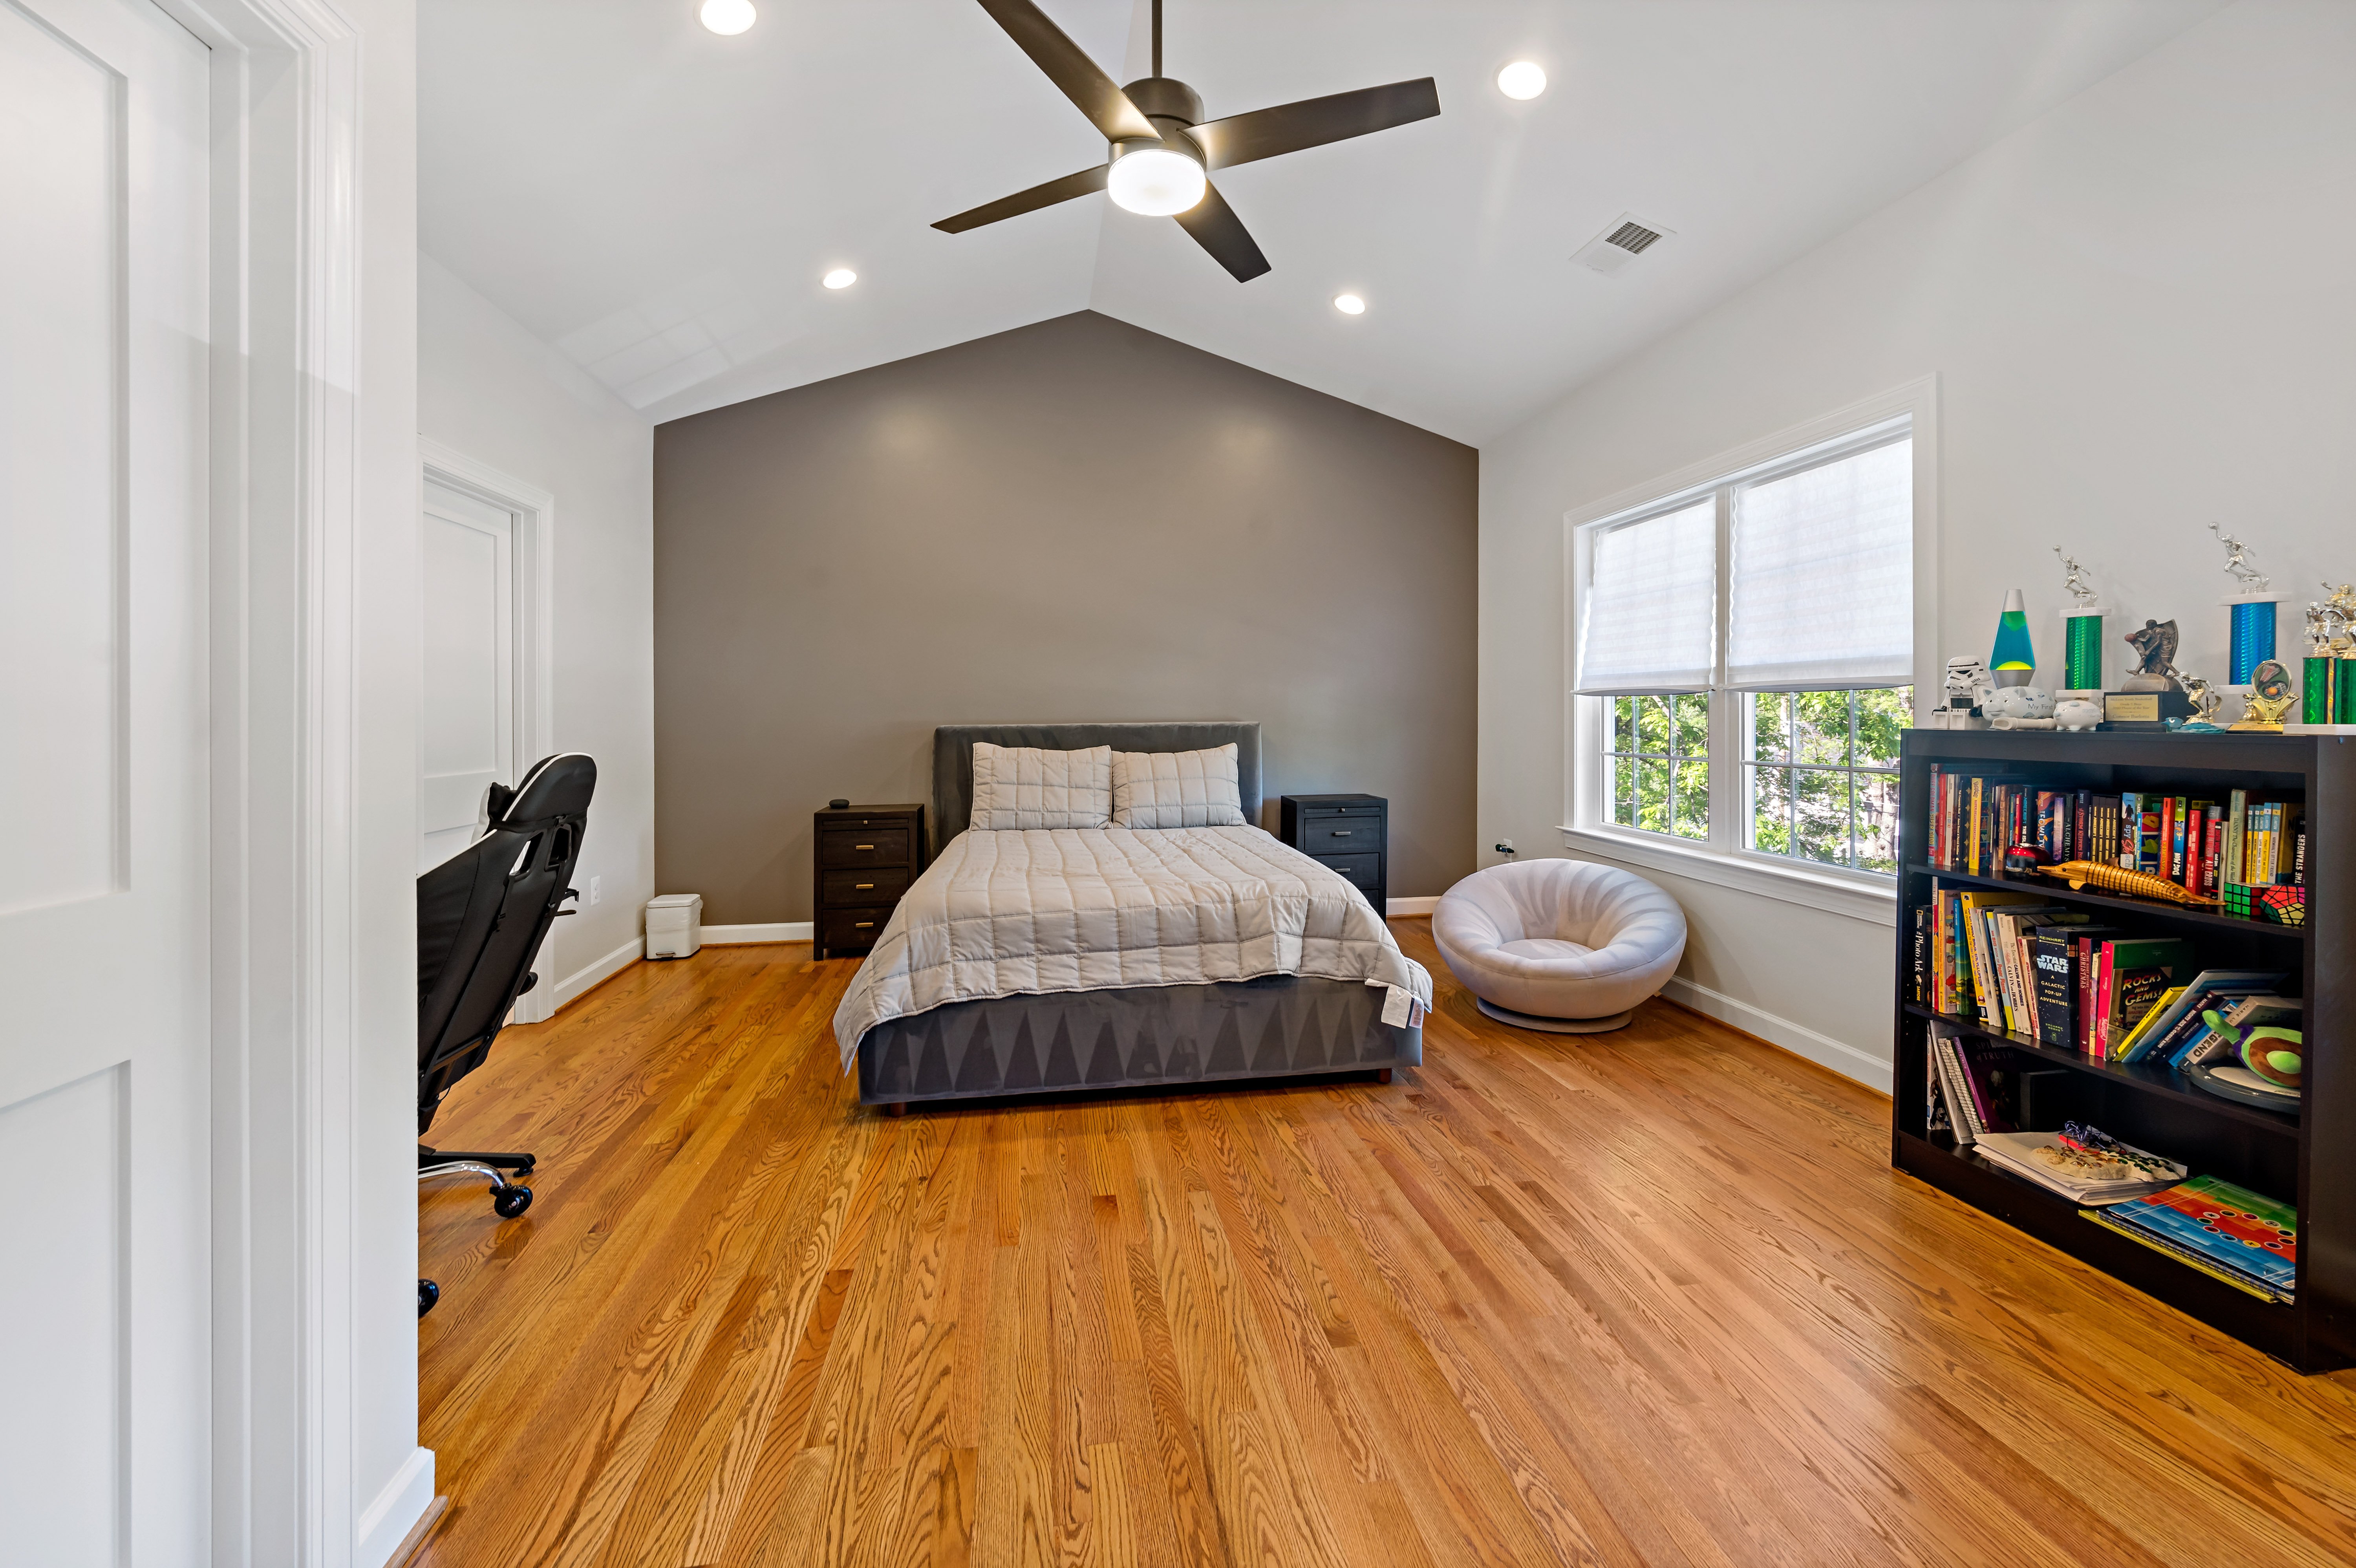 Spacious bedroom addition with cathedral ceiling and hard wood floors